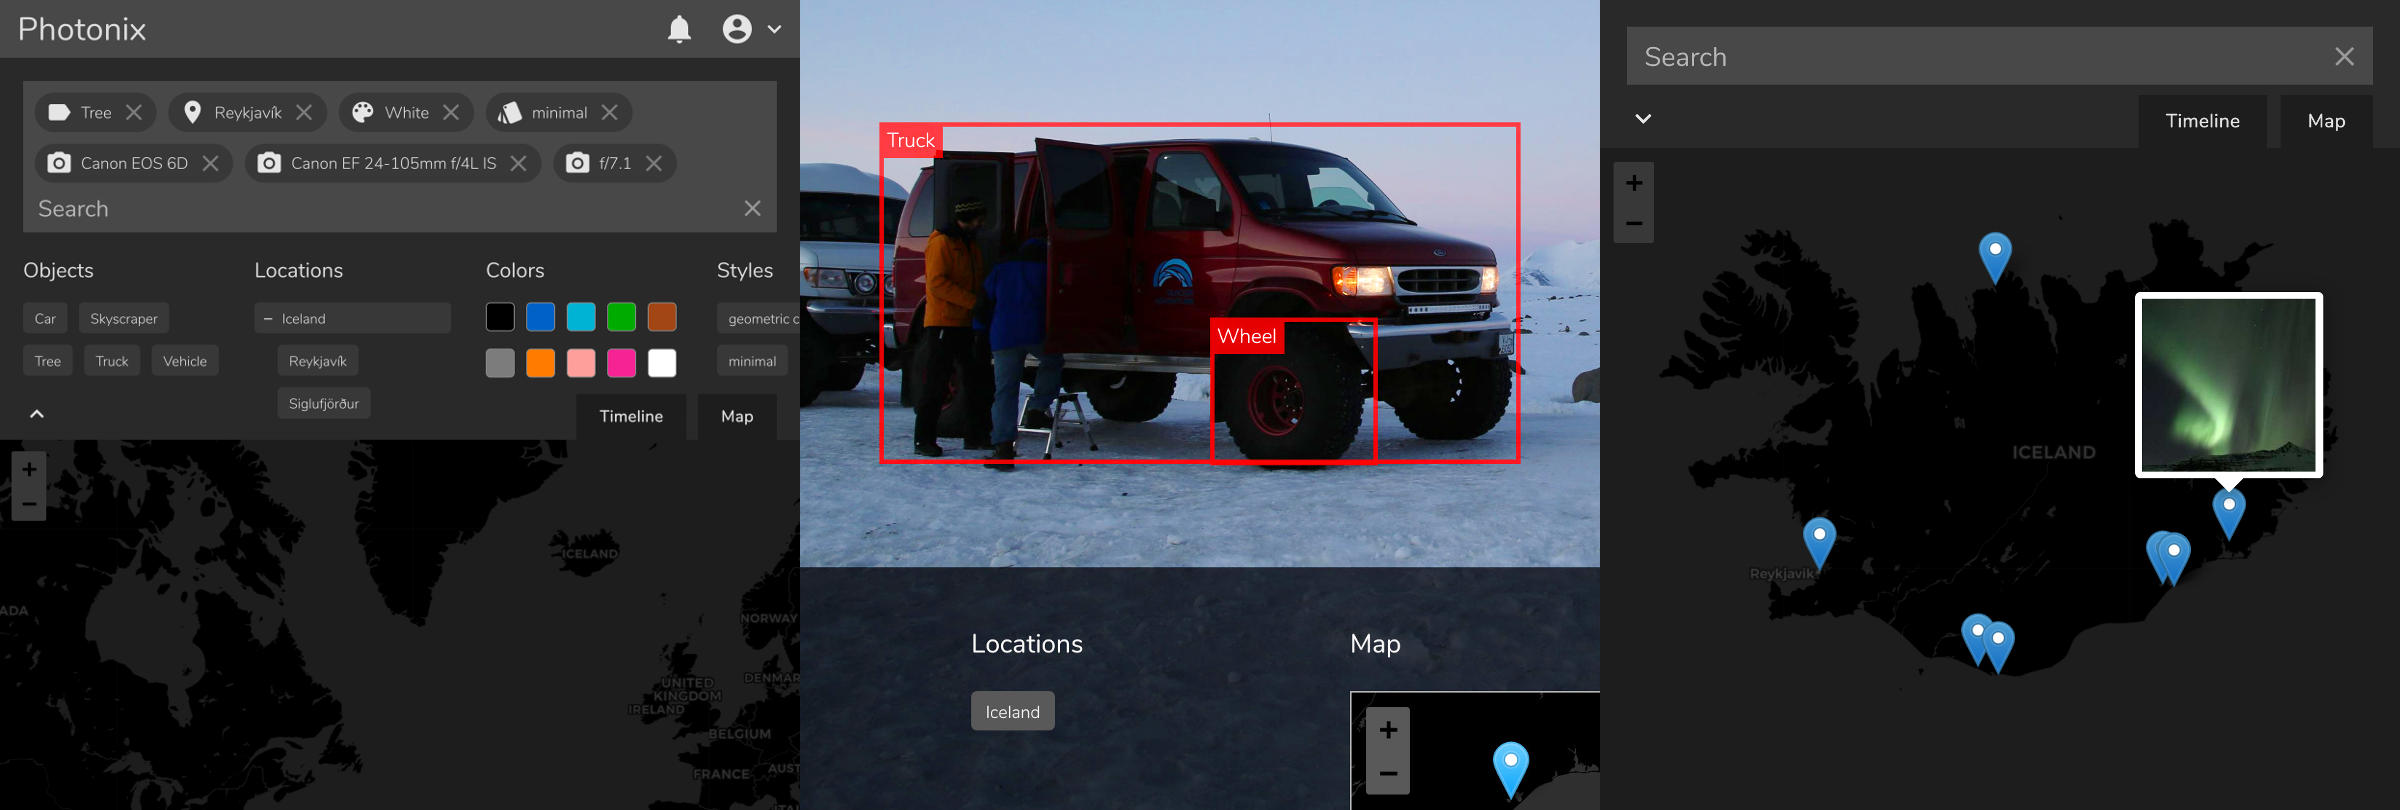 Photonix user interface showing filters, object recognition and map view